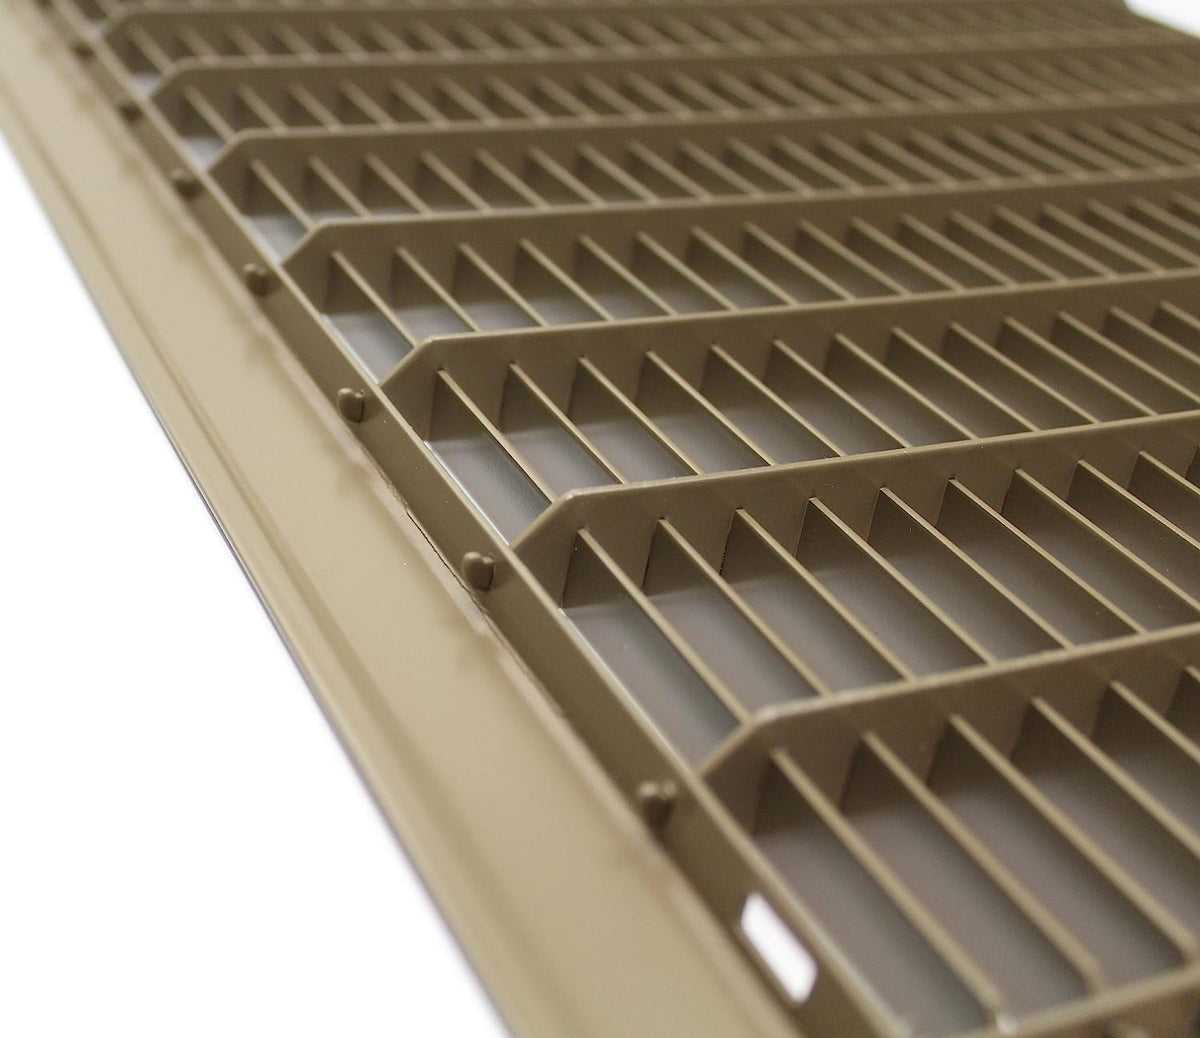 20&quot; X 30&quot; or 30&quot; X 20&quot; Heavy Duty Floor Grille - Fixed Blades Air Grille - Brown [Outer Dimensions: 21.75 X 31.75]